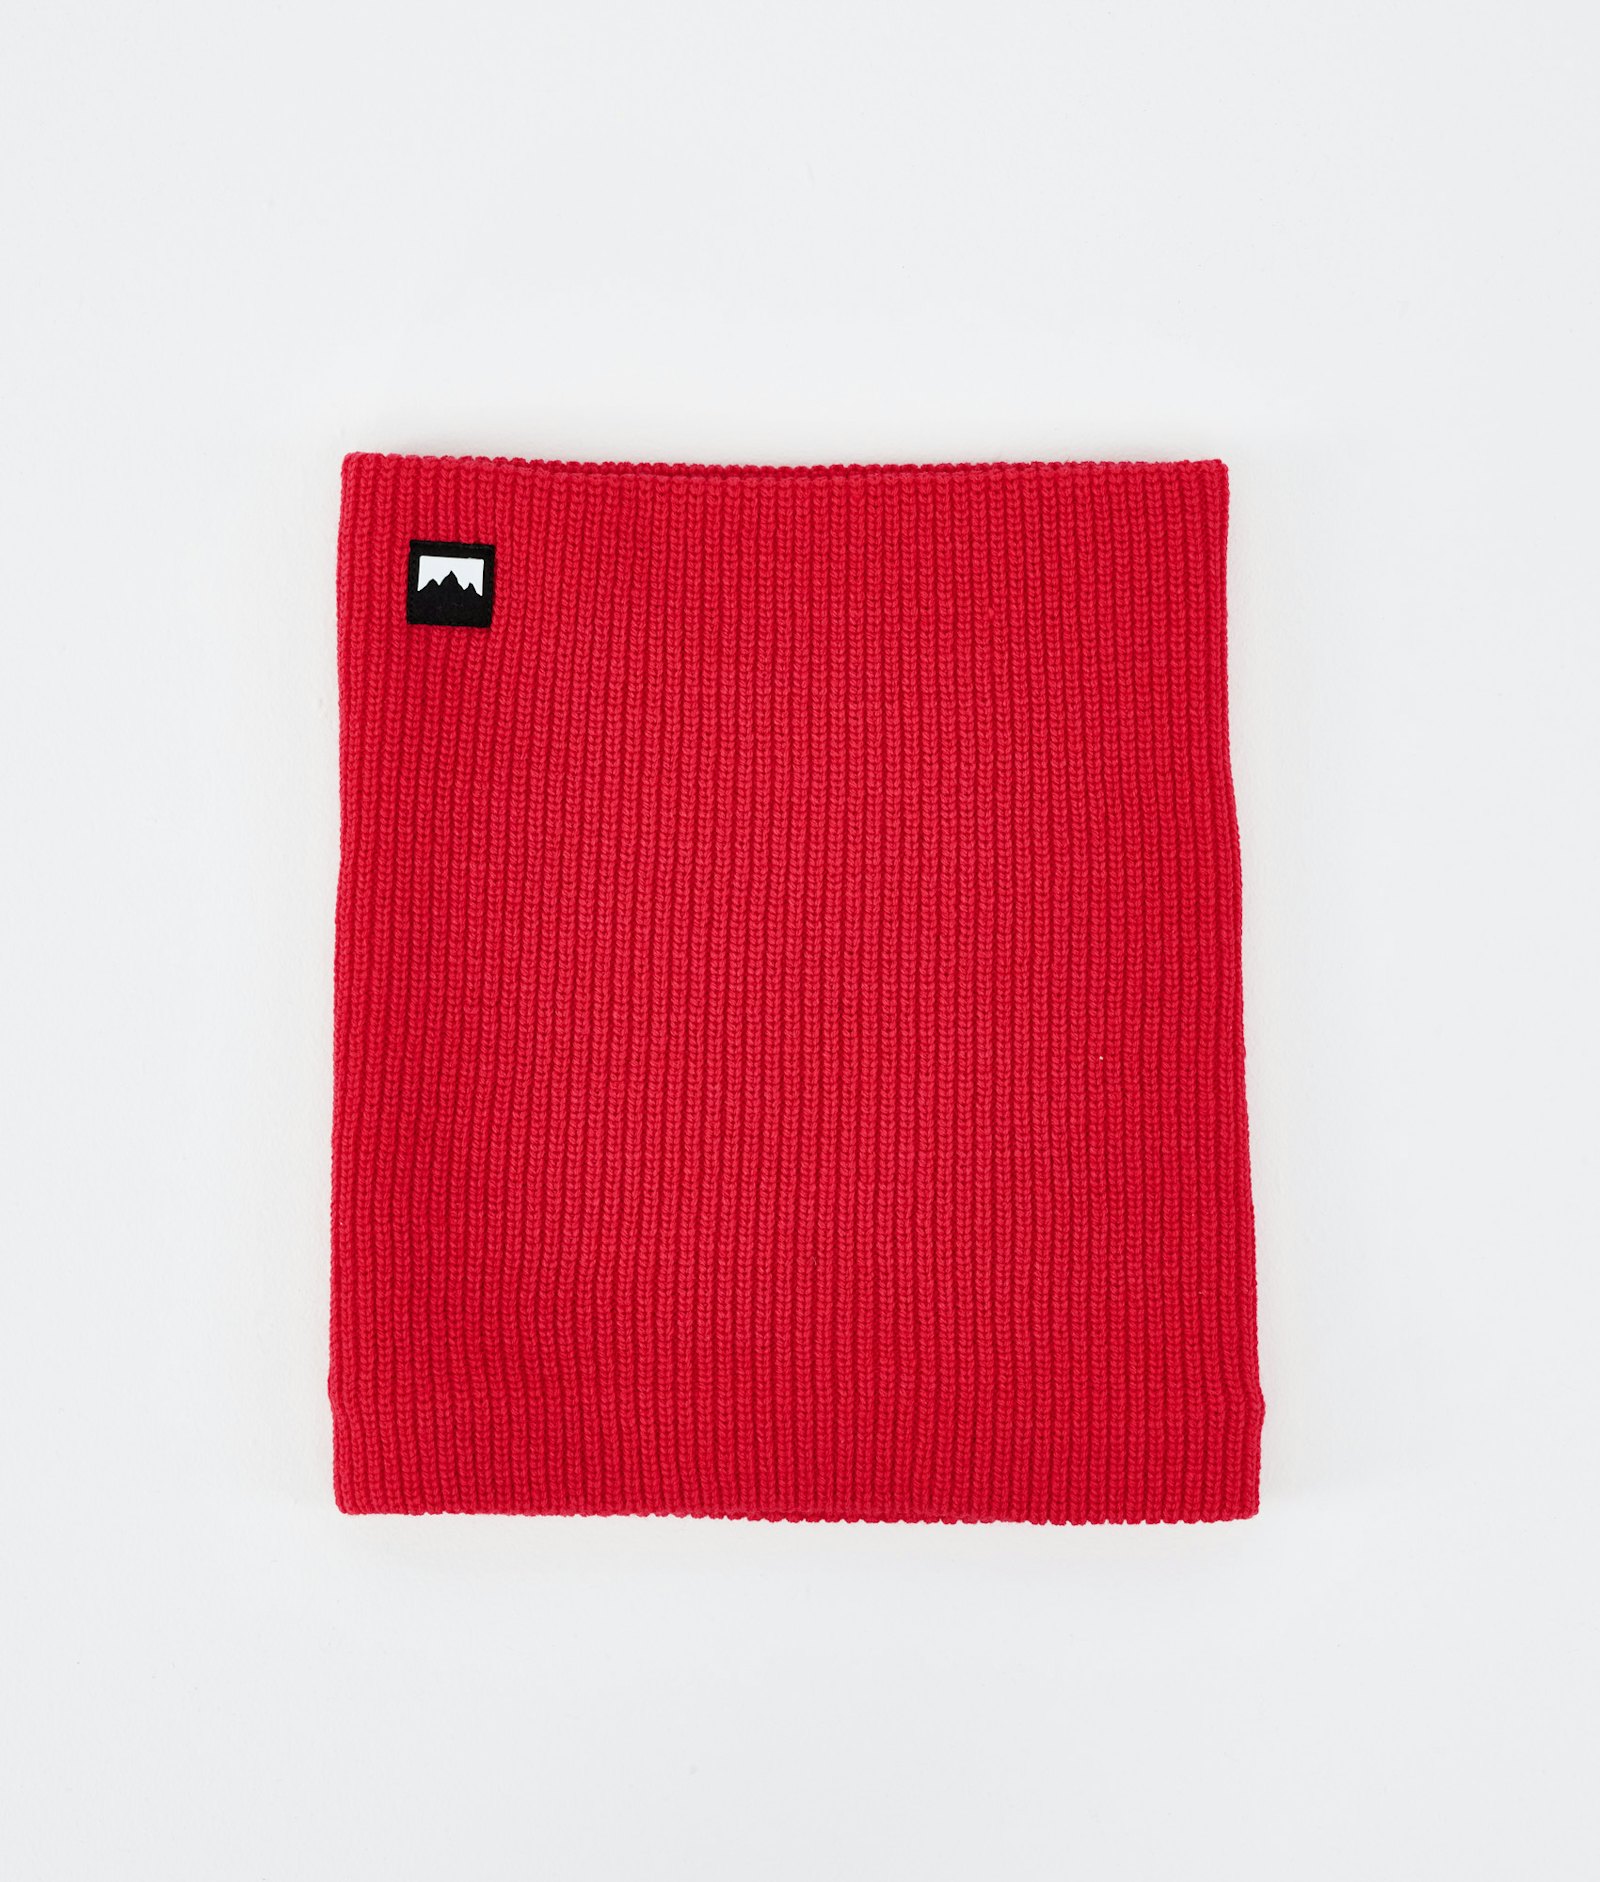 Montec Classic Knitted Facemask Red, Image 1 of 3